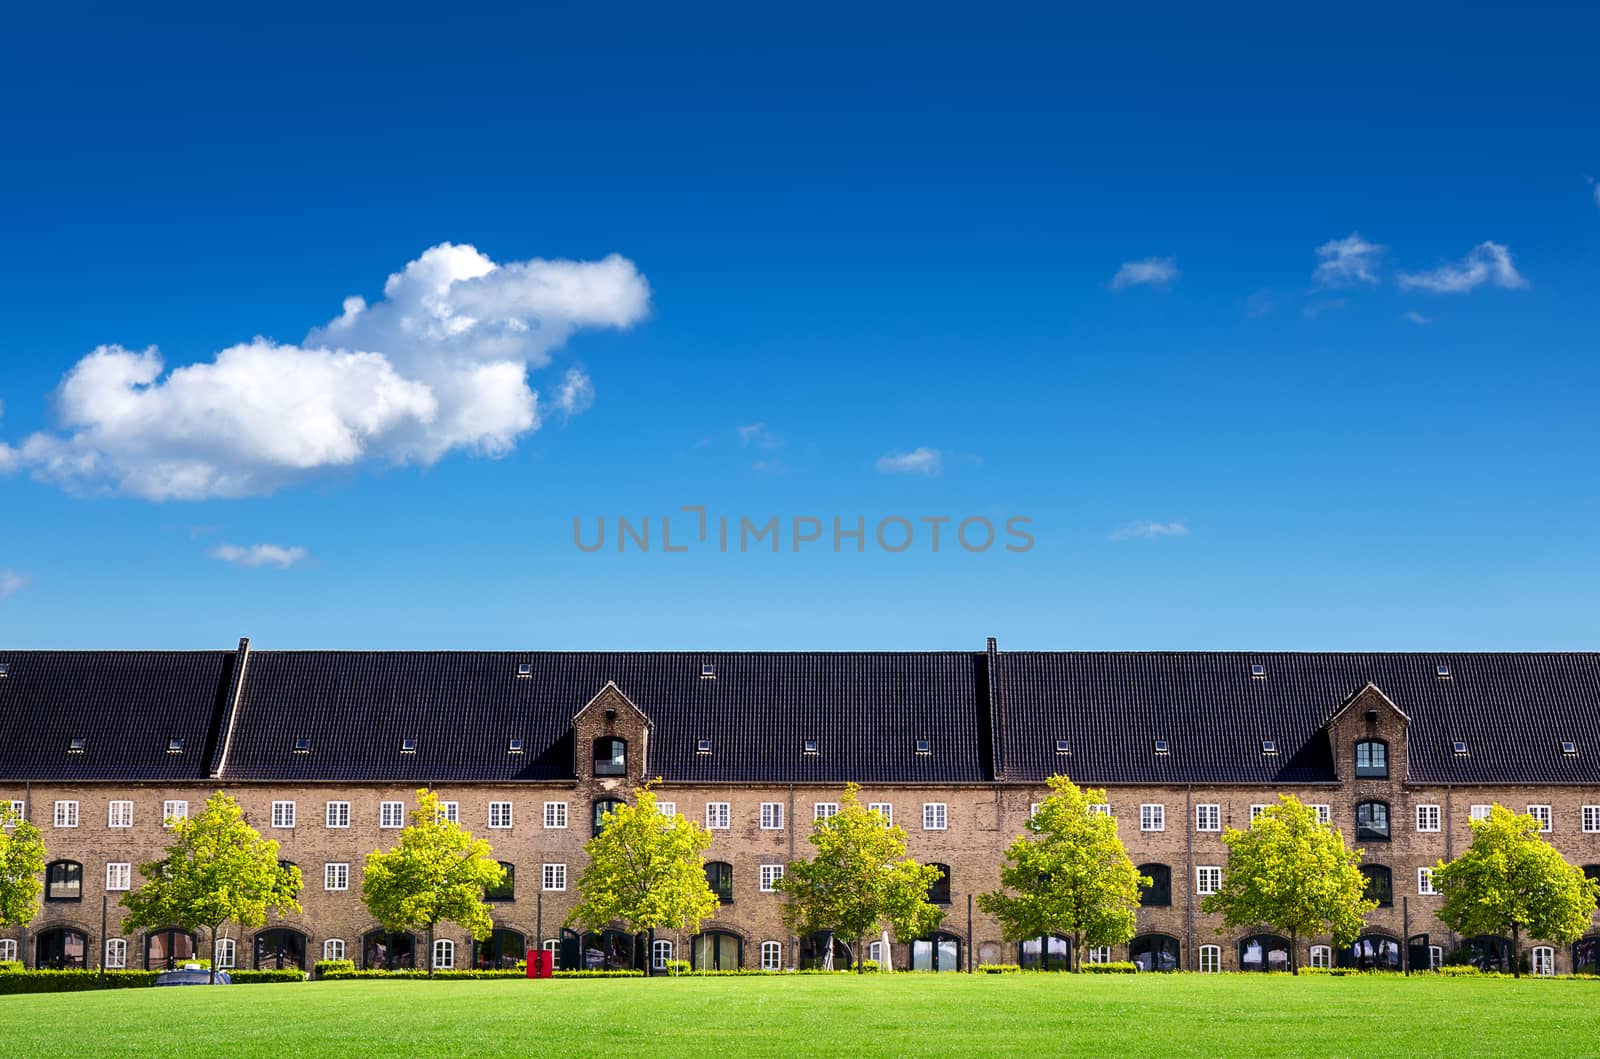 Classic and beautiful apartment, danish style, with clear blue sky and grass lawn in Copenhagen Denmark, Europe